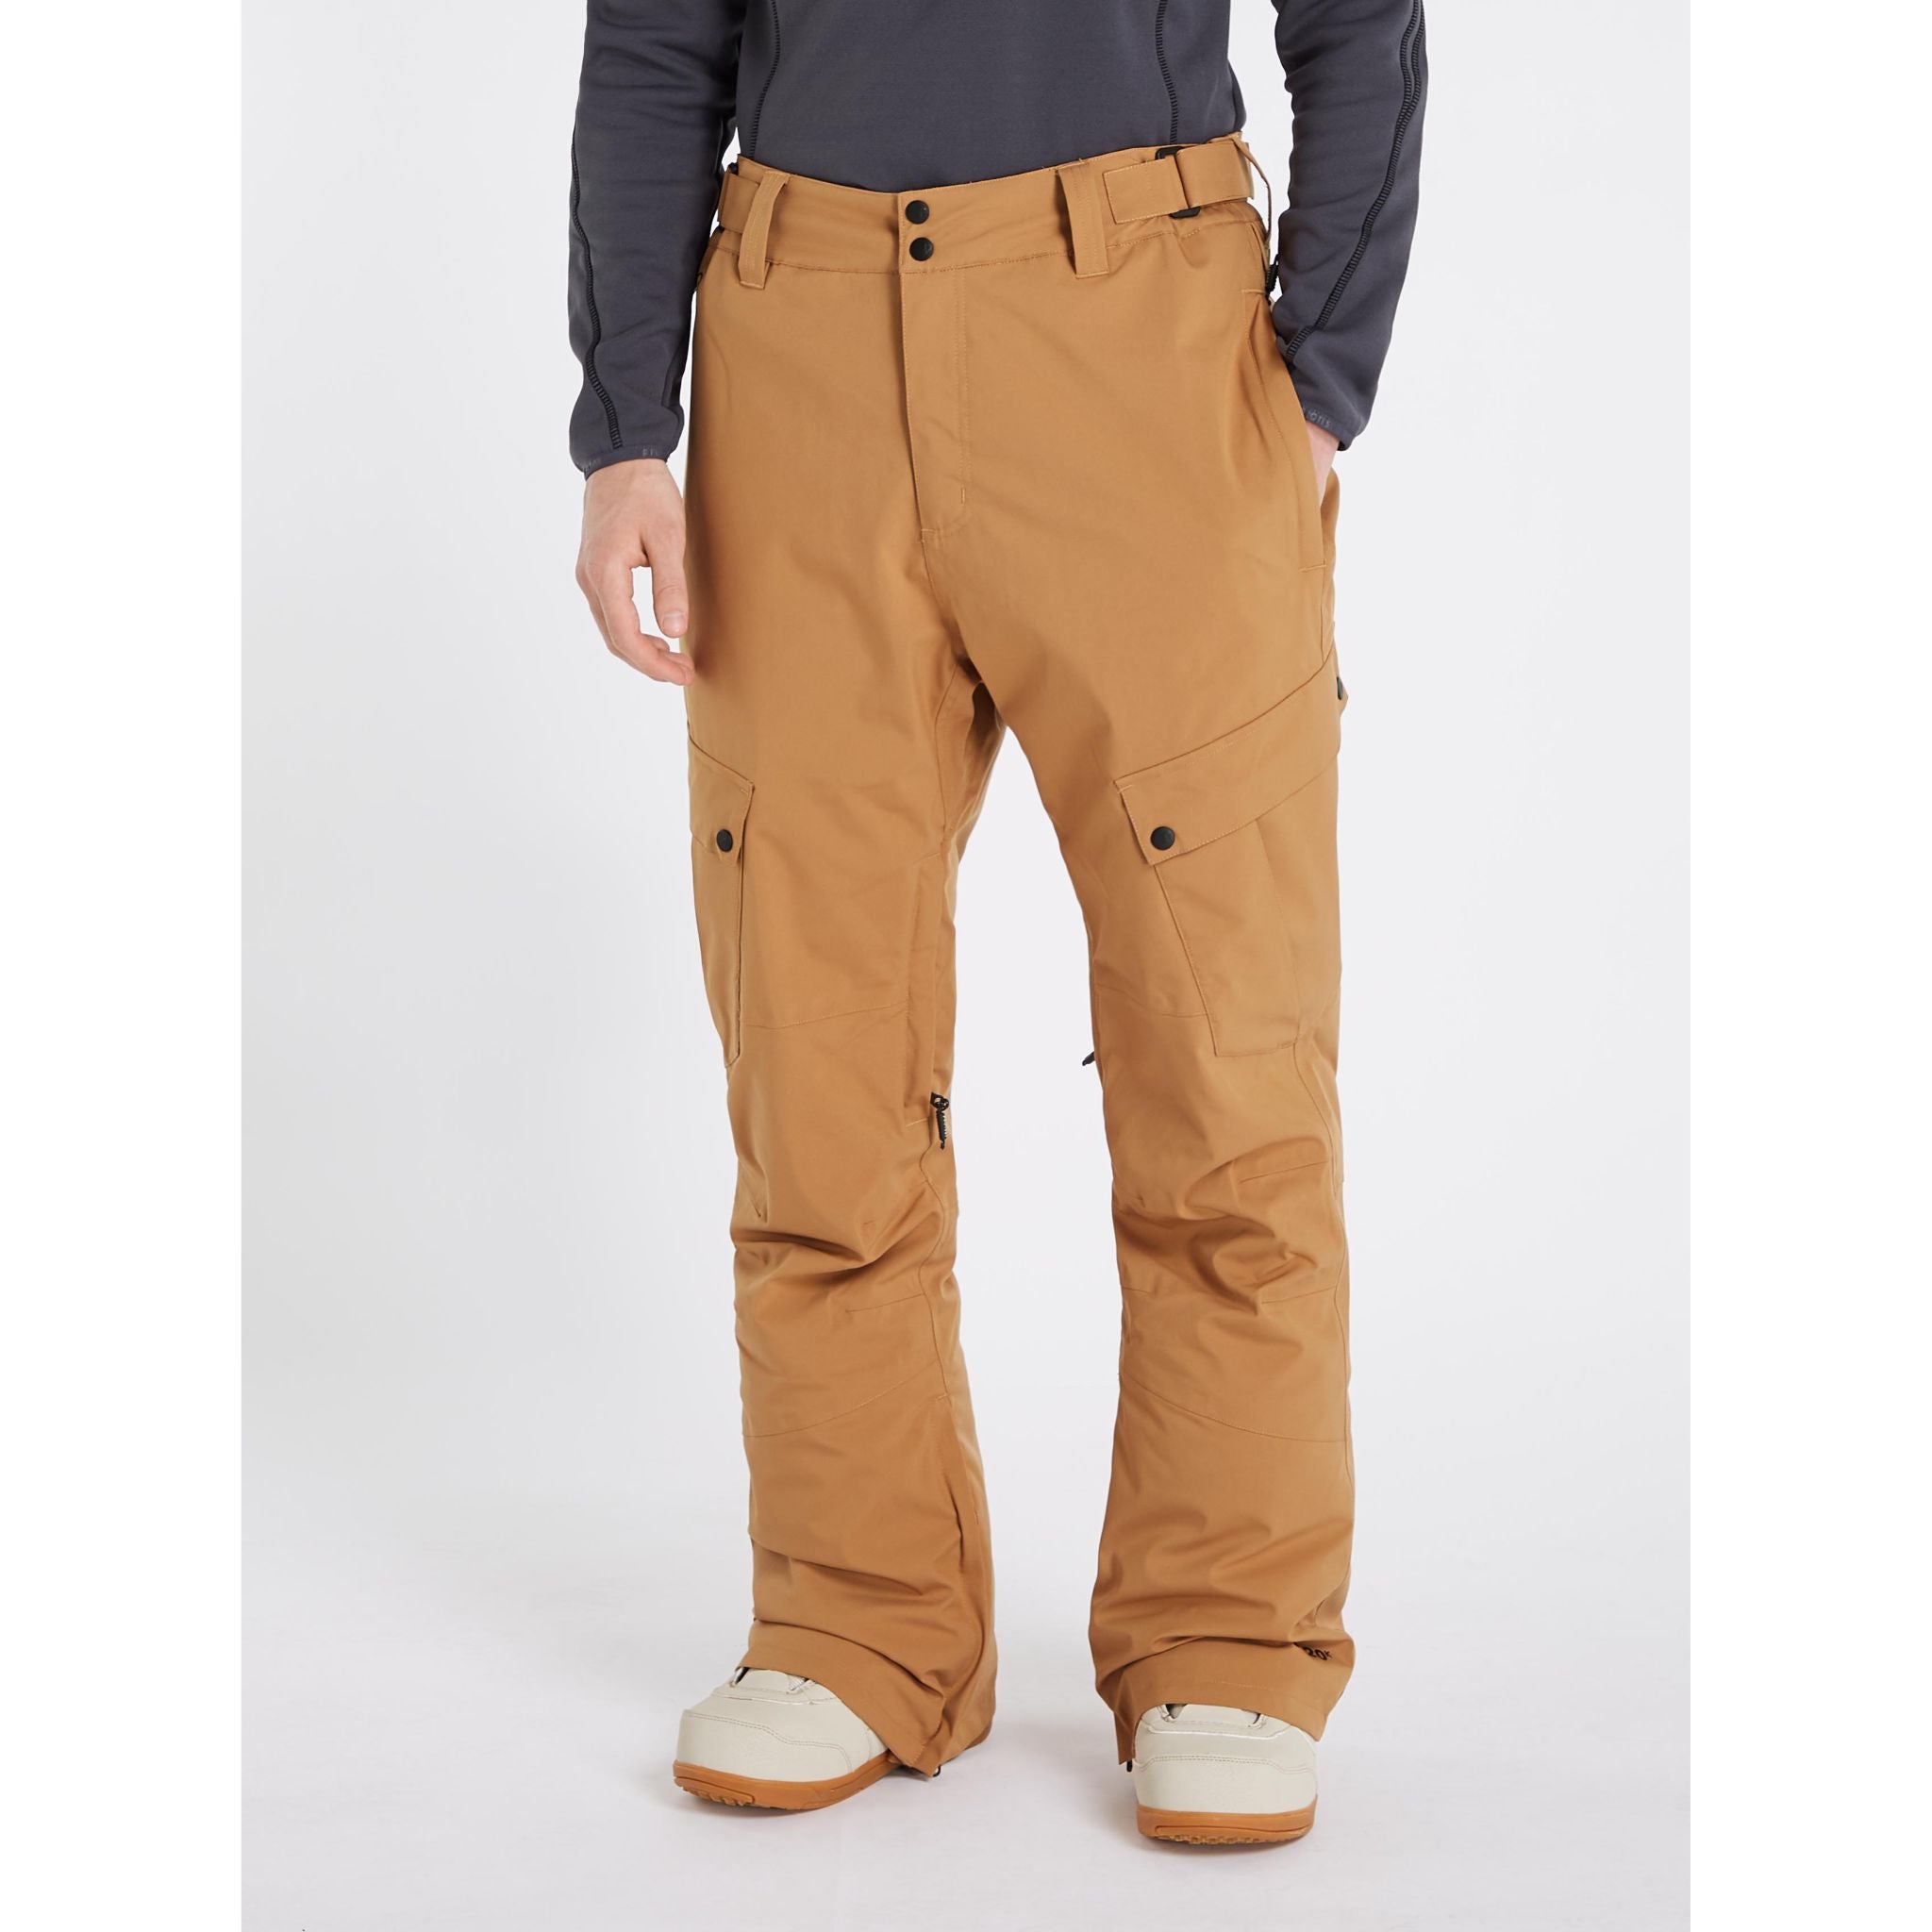 Protest Mens Zucca Snow Pants